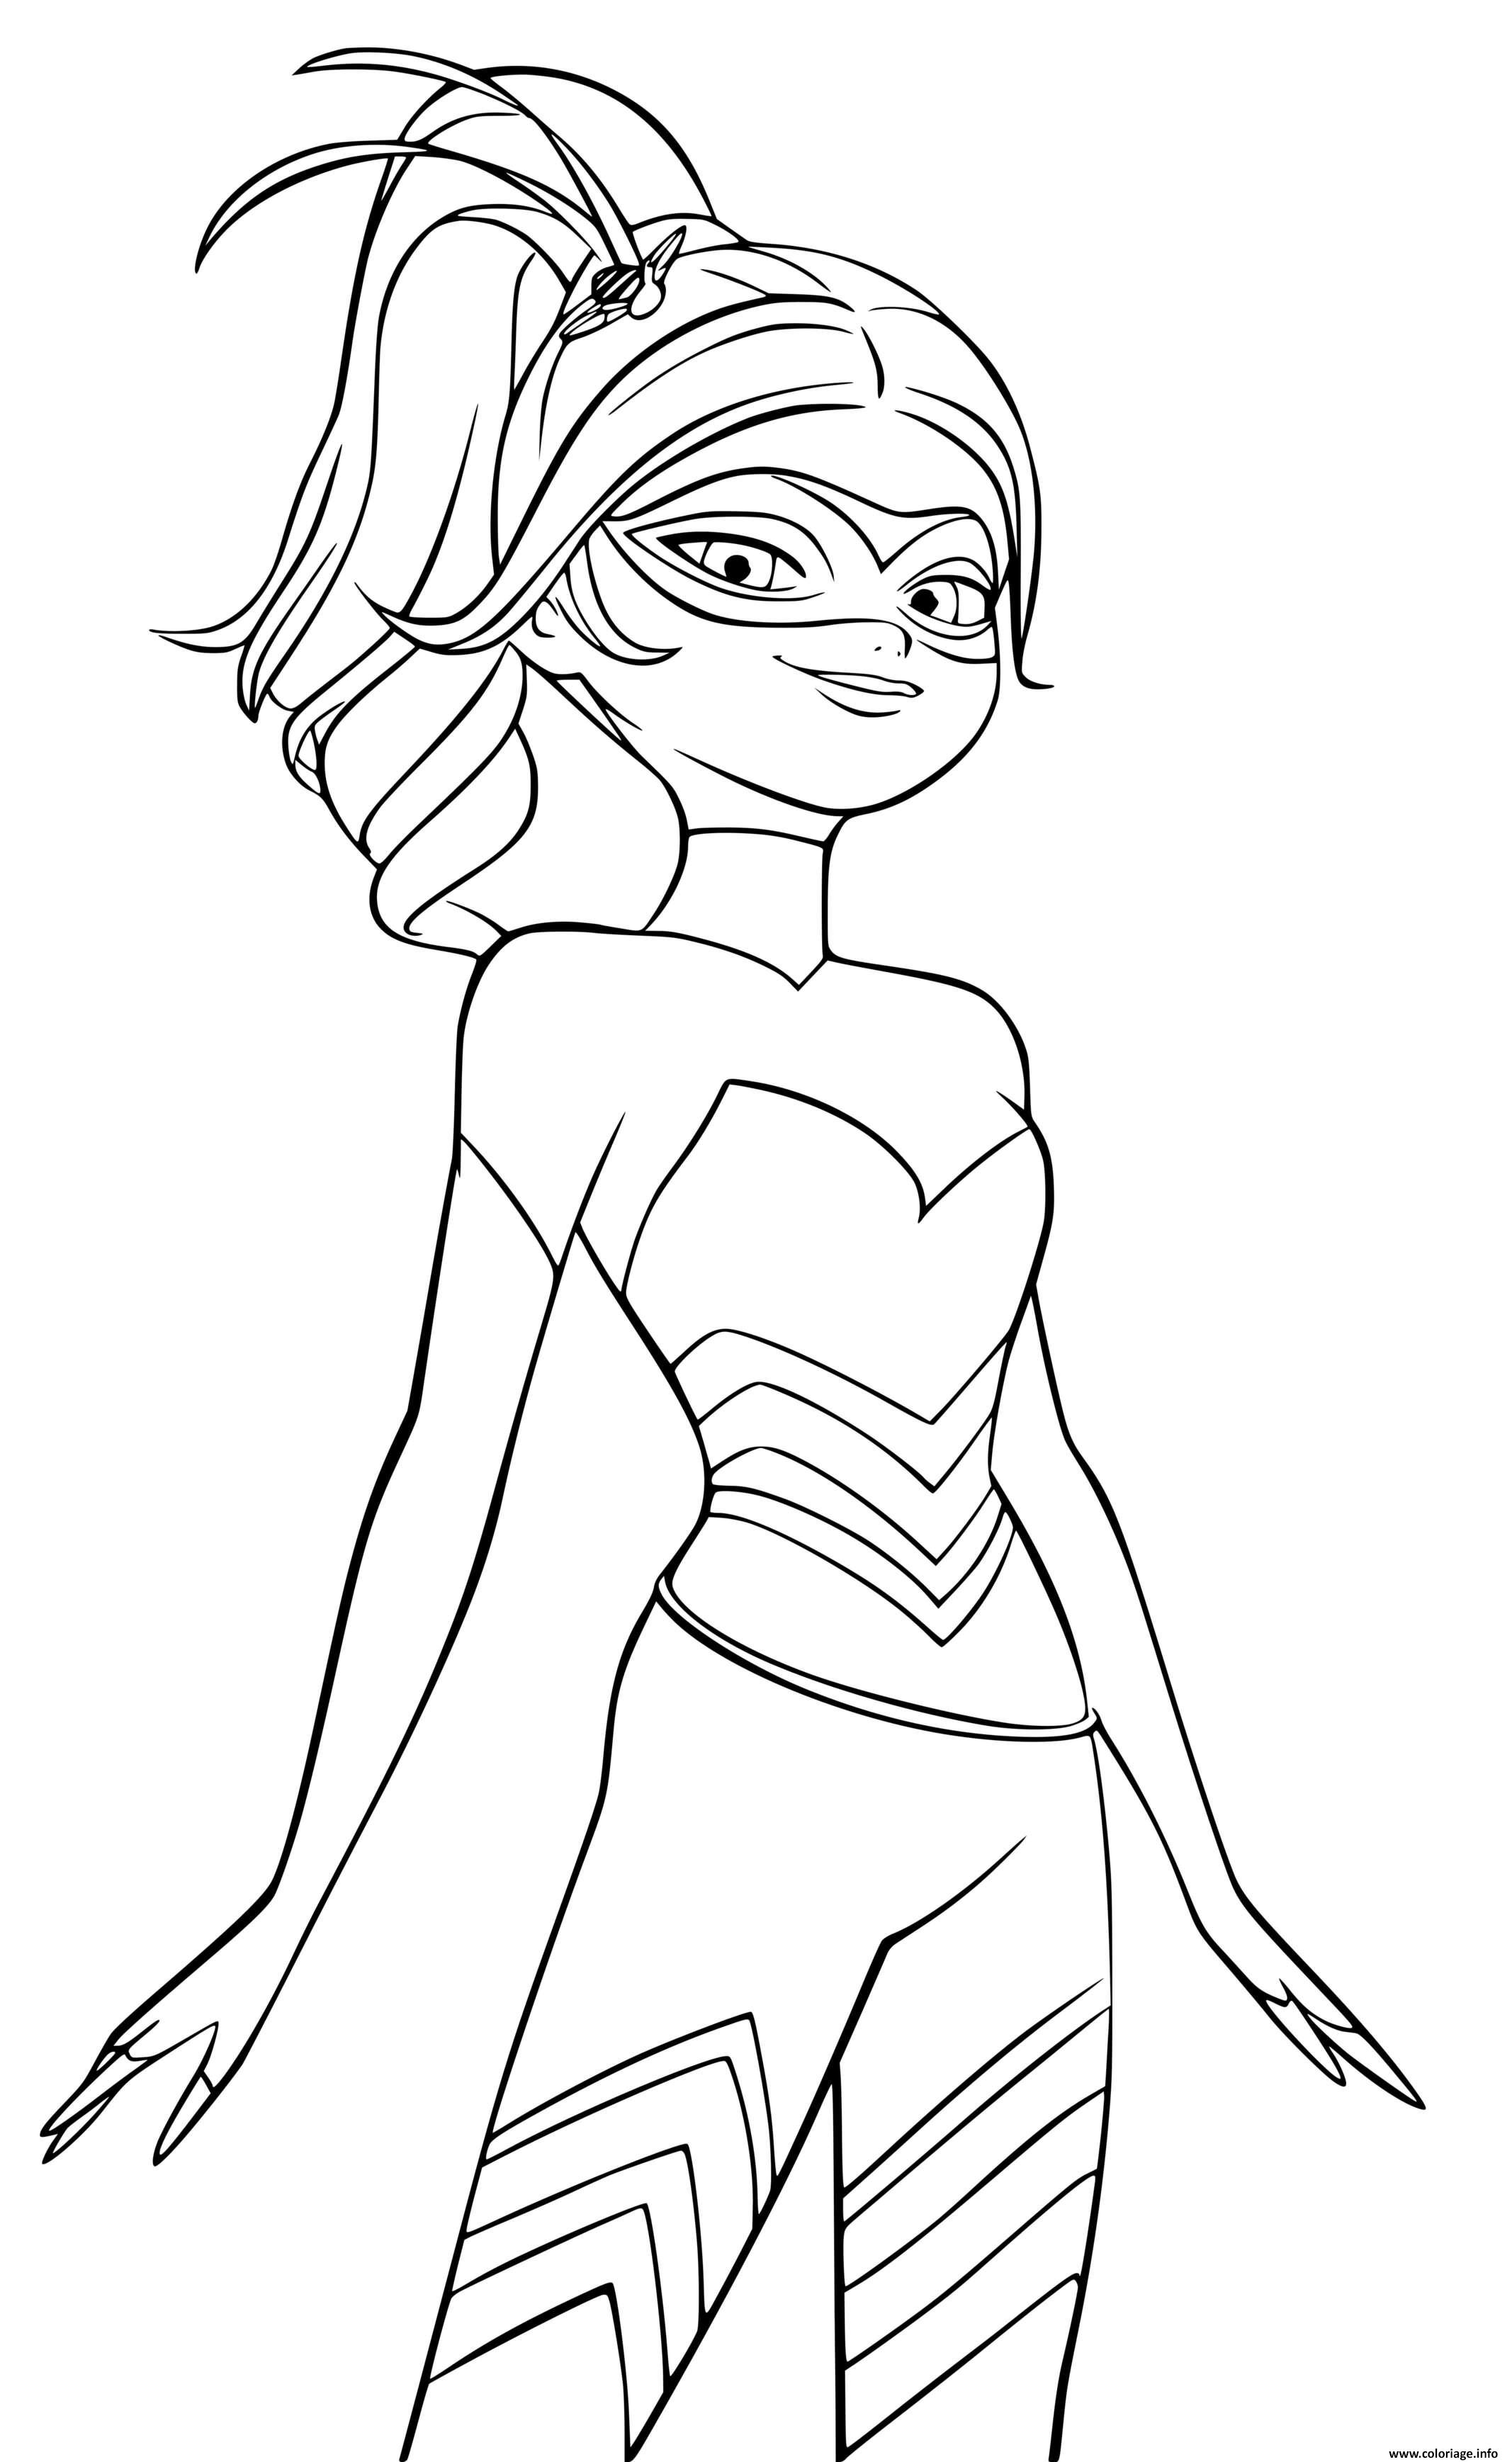 Coloriage Miraculous Ladybug Queen Bee or Chloes - JeColorie.com